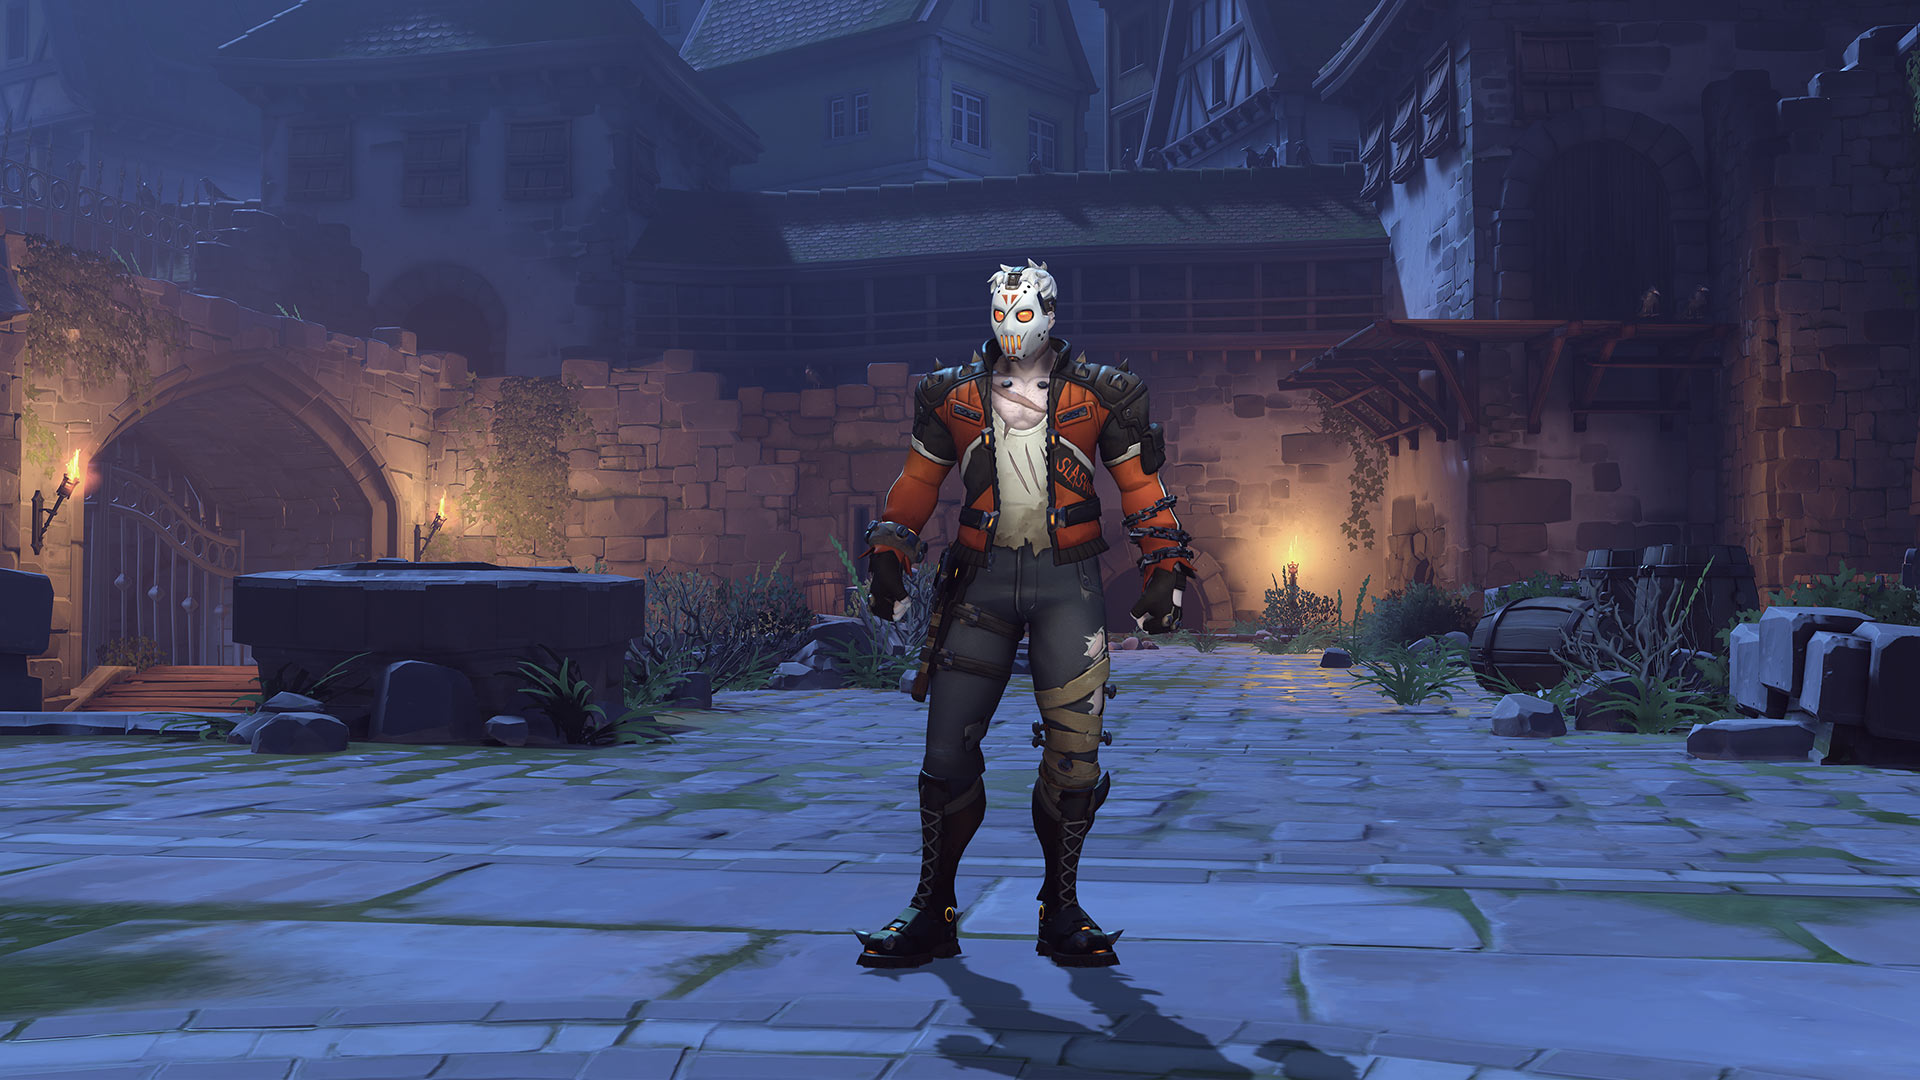 The Daily Crate | Overwatch Skins Based on Halloween Classics